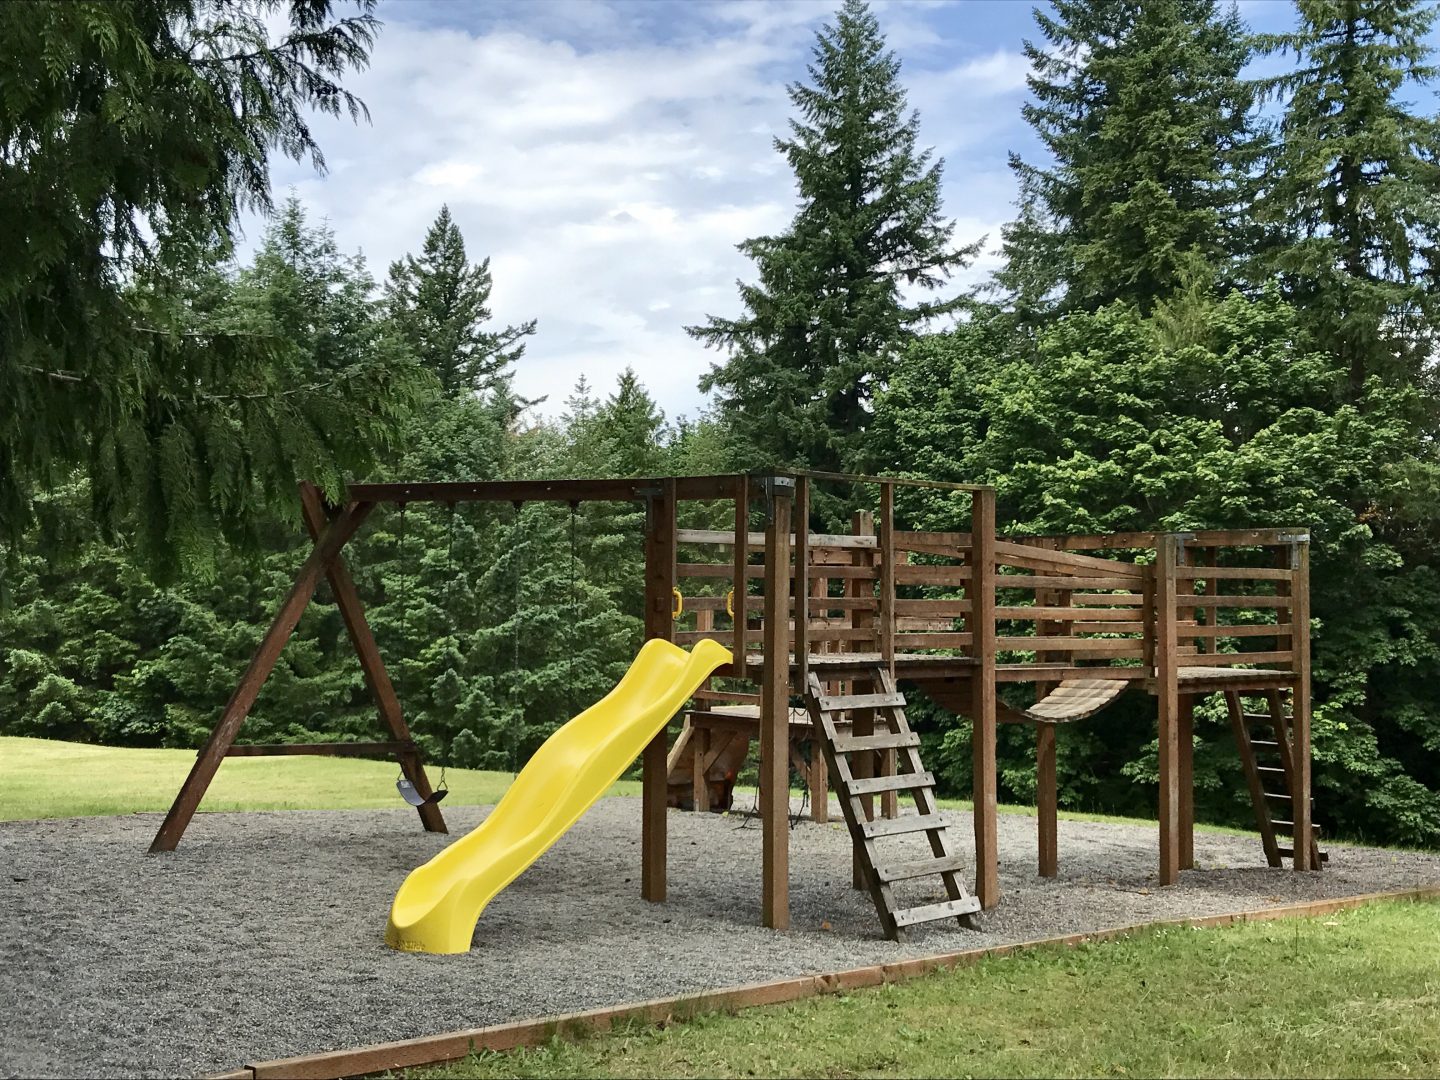 Our children always love finding a great playground wherever we stay. This one was large and in great condition. 